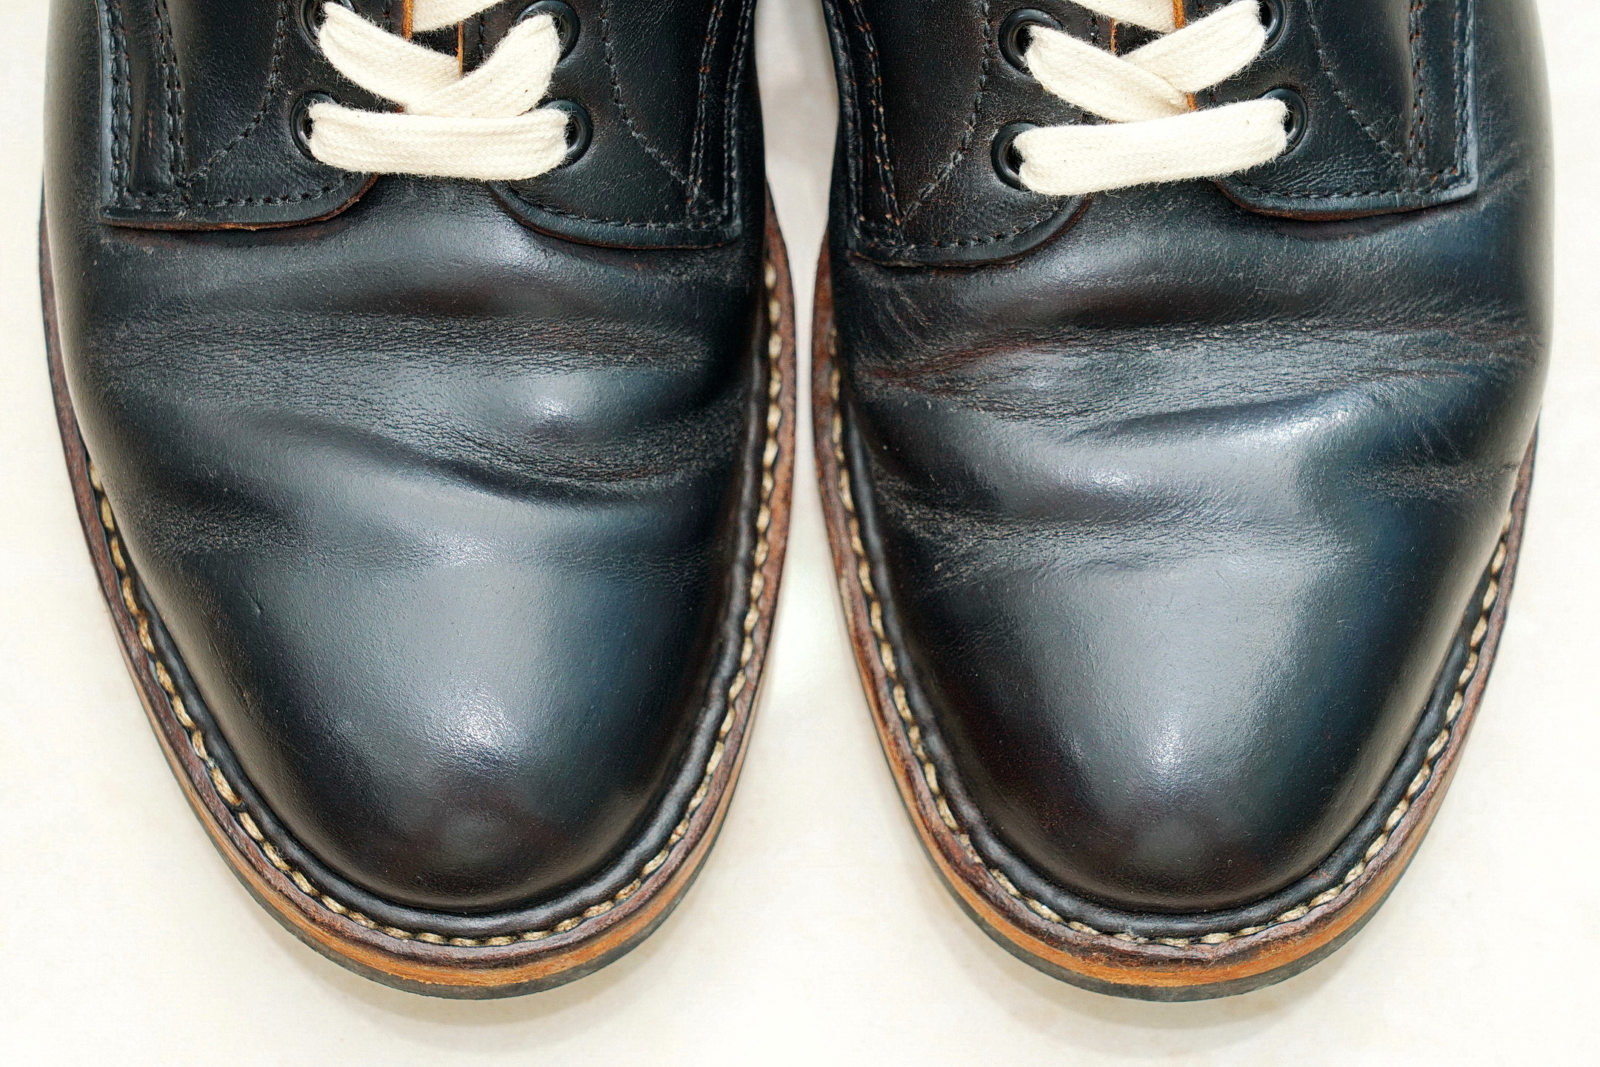 White's MP Service Boots 5Inches Horween CXL BLK 軍警靴，鞋頭俯視特寫